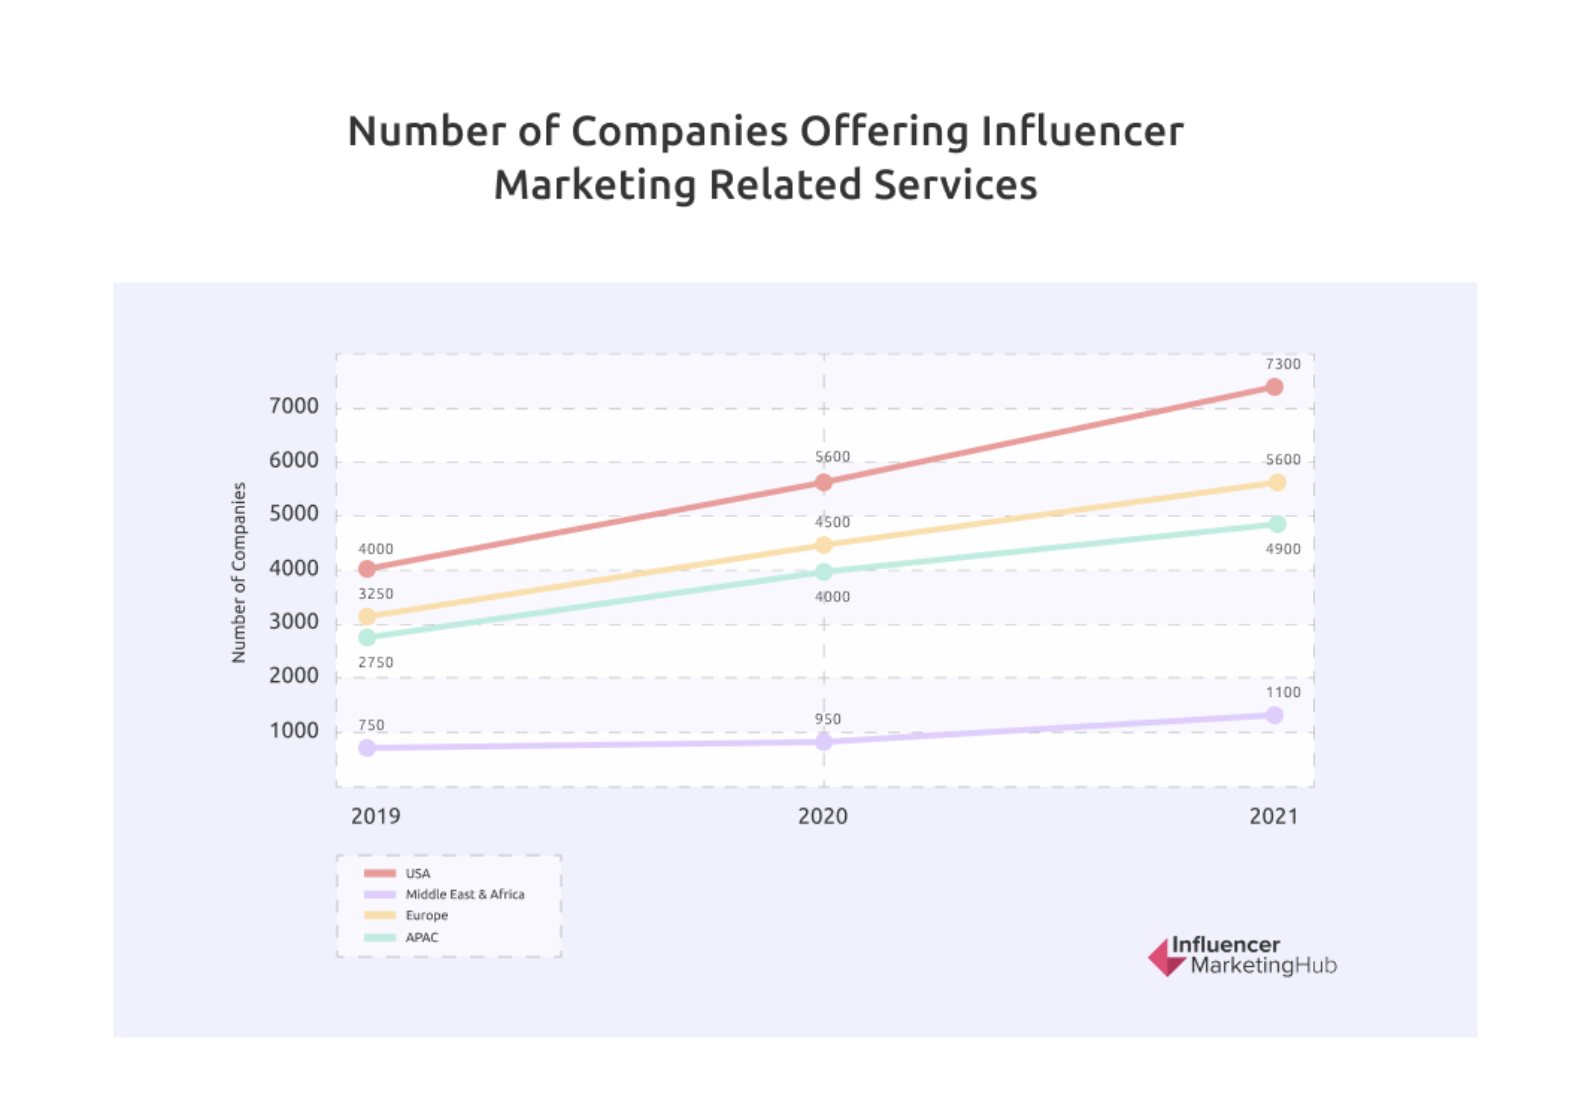 Number of Companies Offering Influencer Marketing Related Services is increasing.